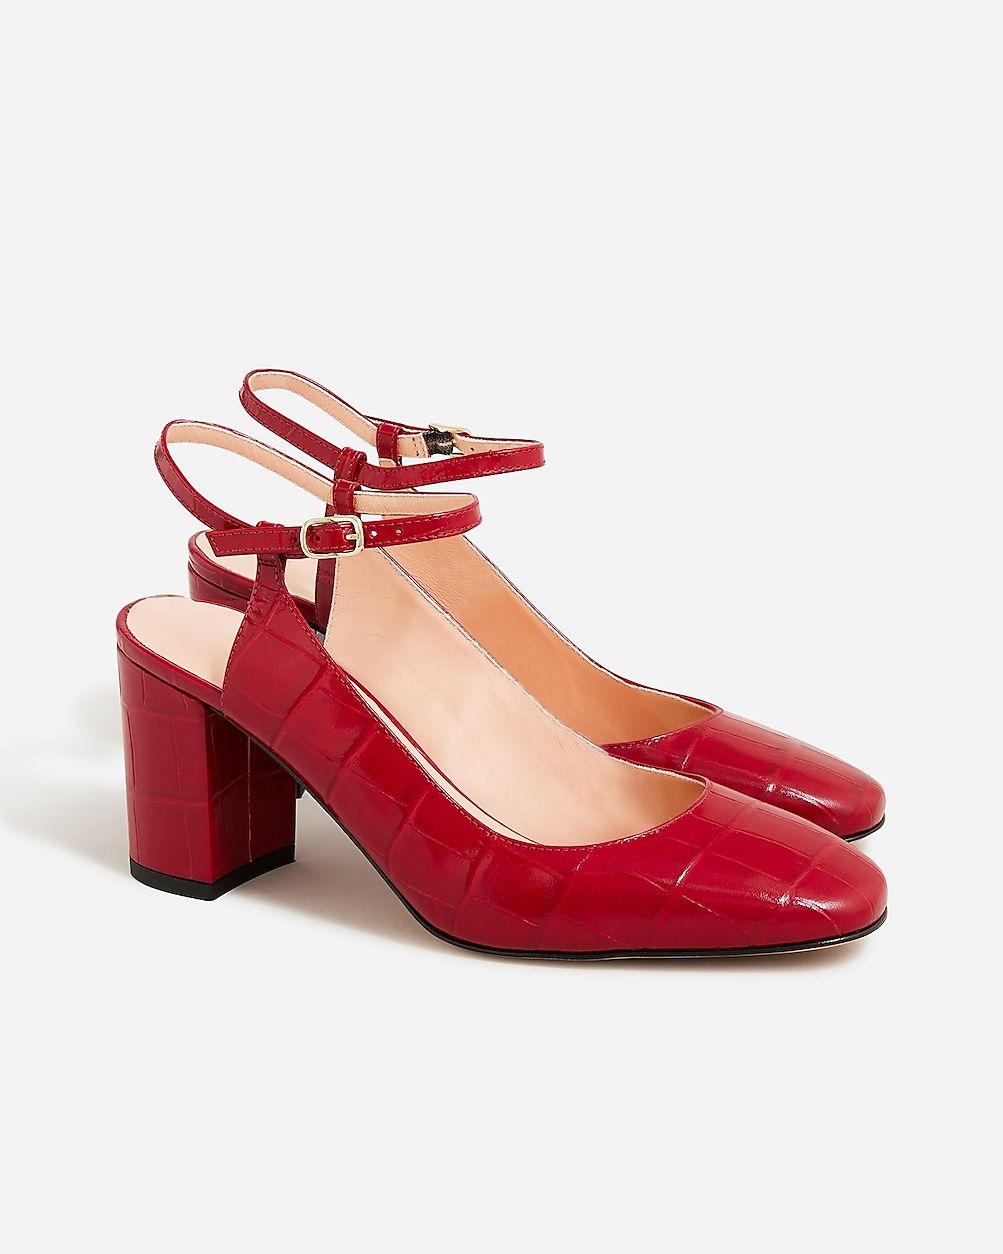 Maisie ankle-strap heels in croc-embossed leather | J.Crew US